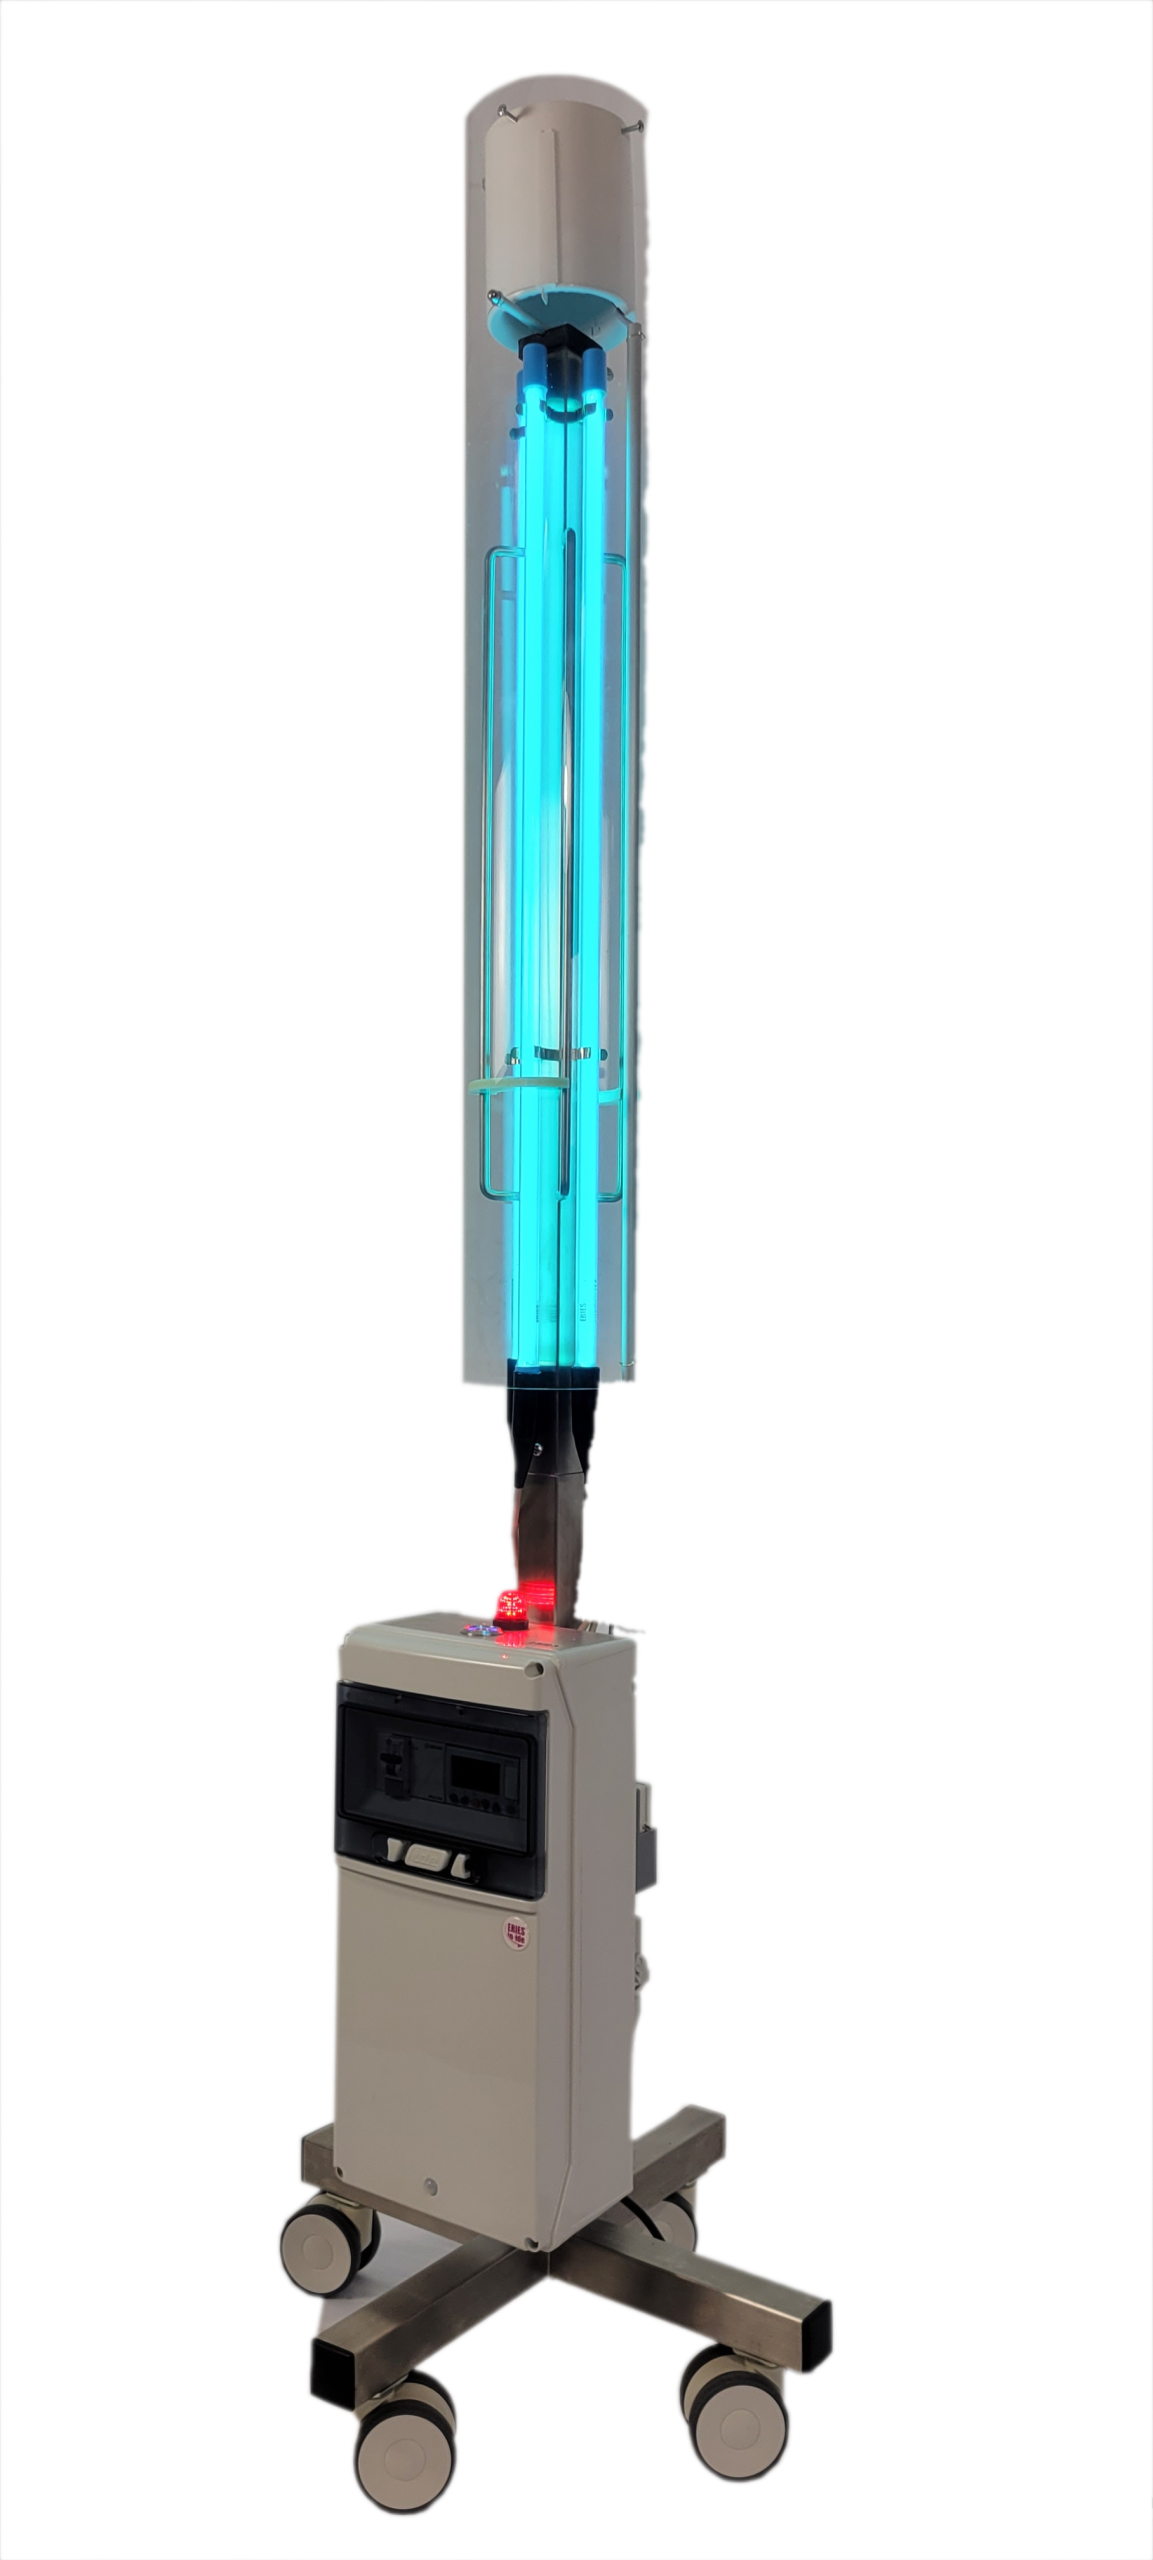 Disinfection tower to disinfect ambient air with UV